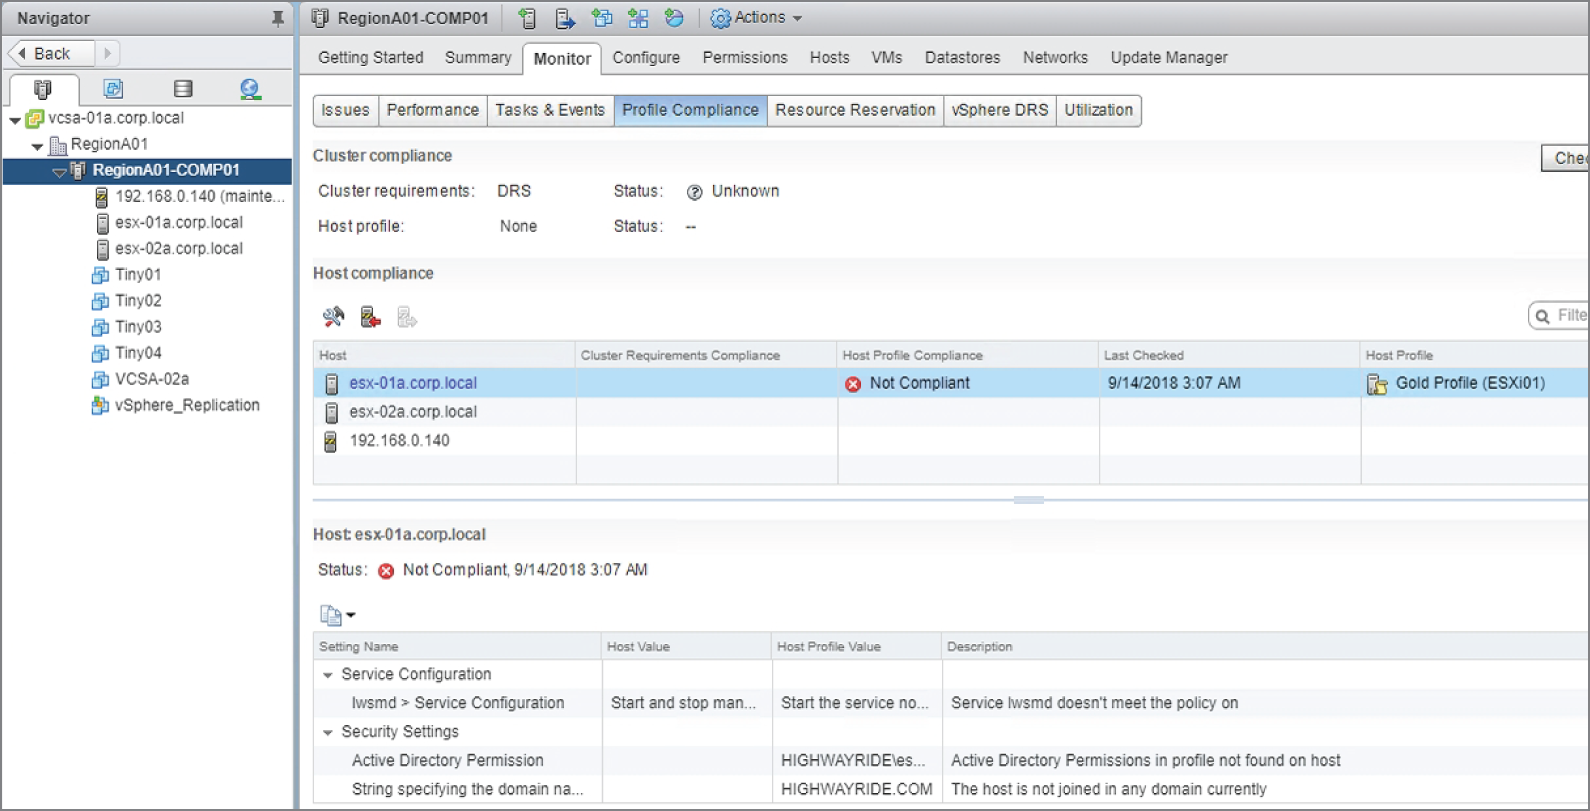 Snapshot of checking host compliance from the cluster view.